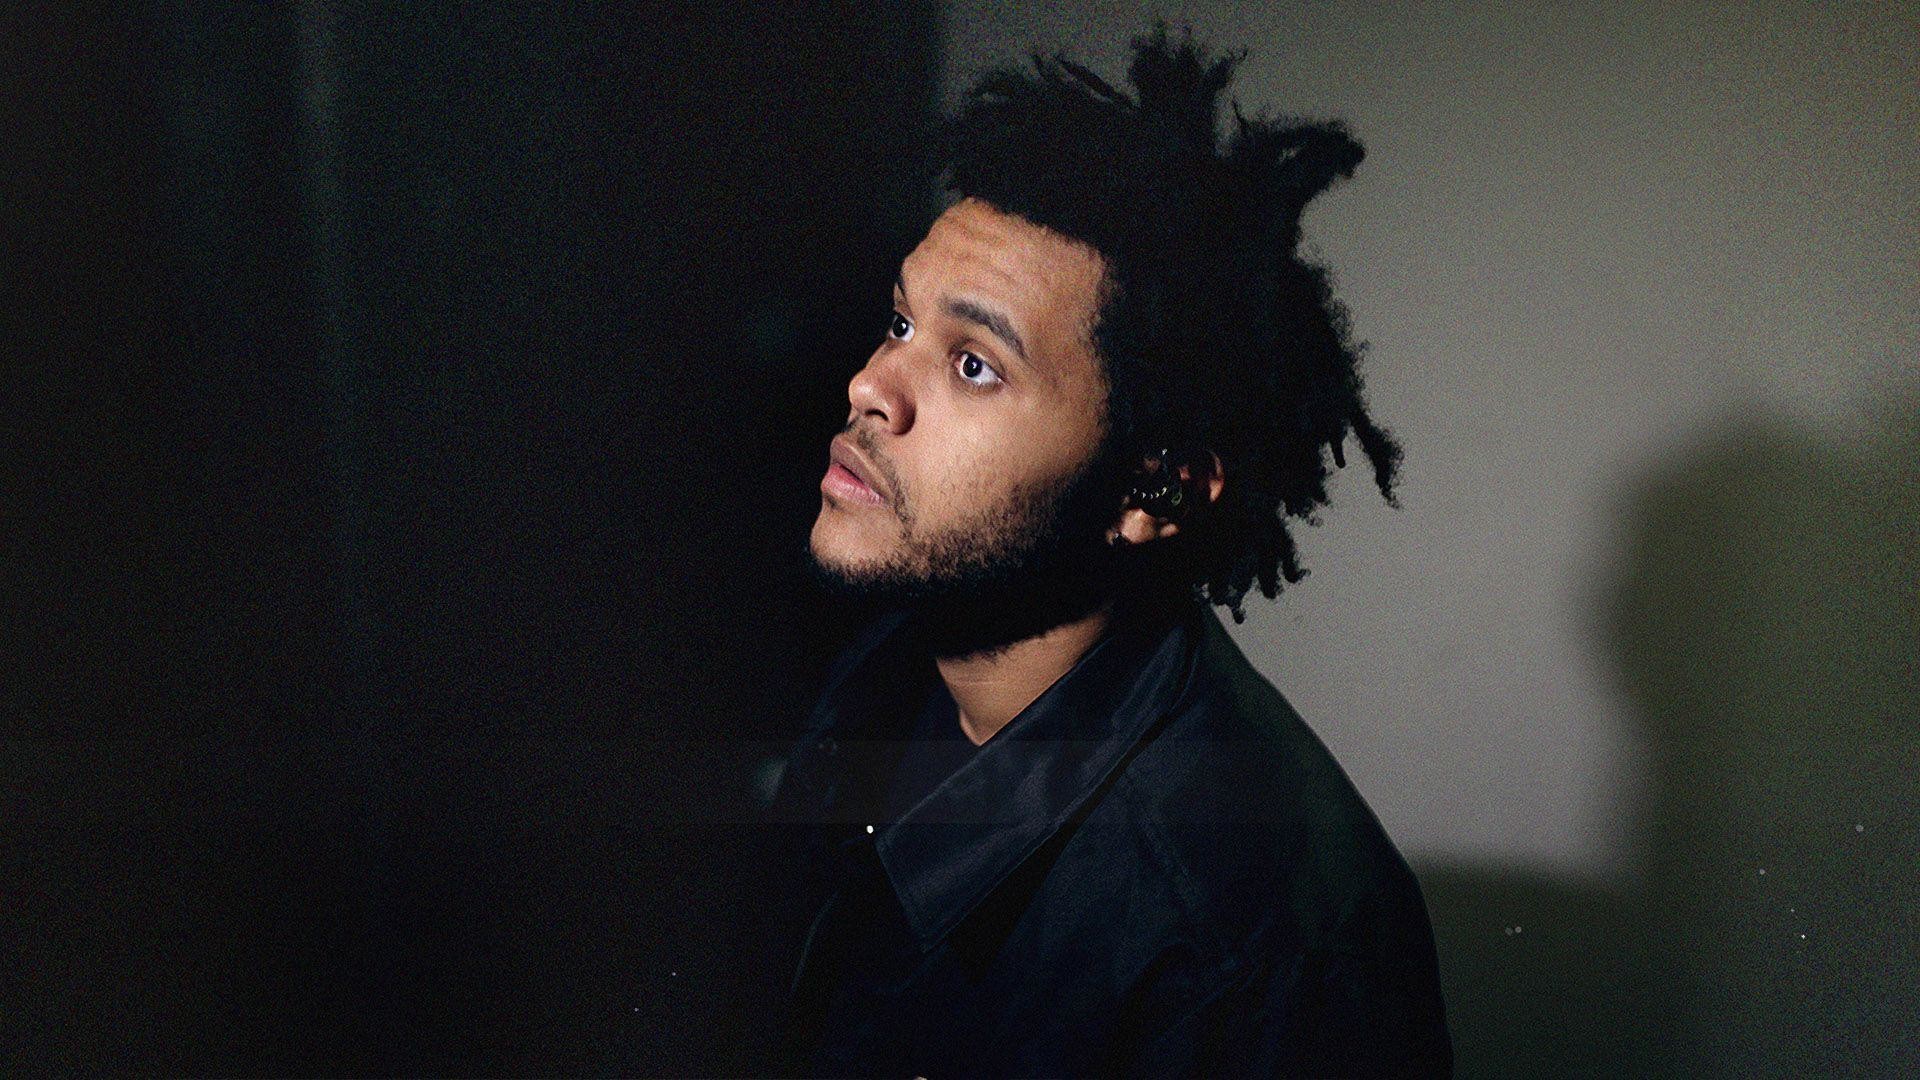 1920x1080 The Weeknd HD Wallpaper, Live The Weeknd HD Images (42), PC .